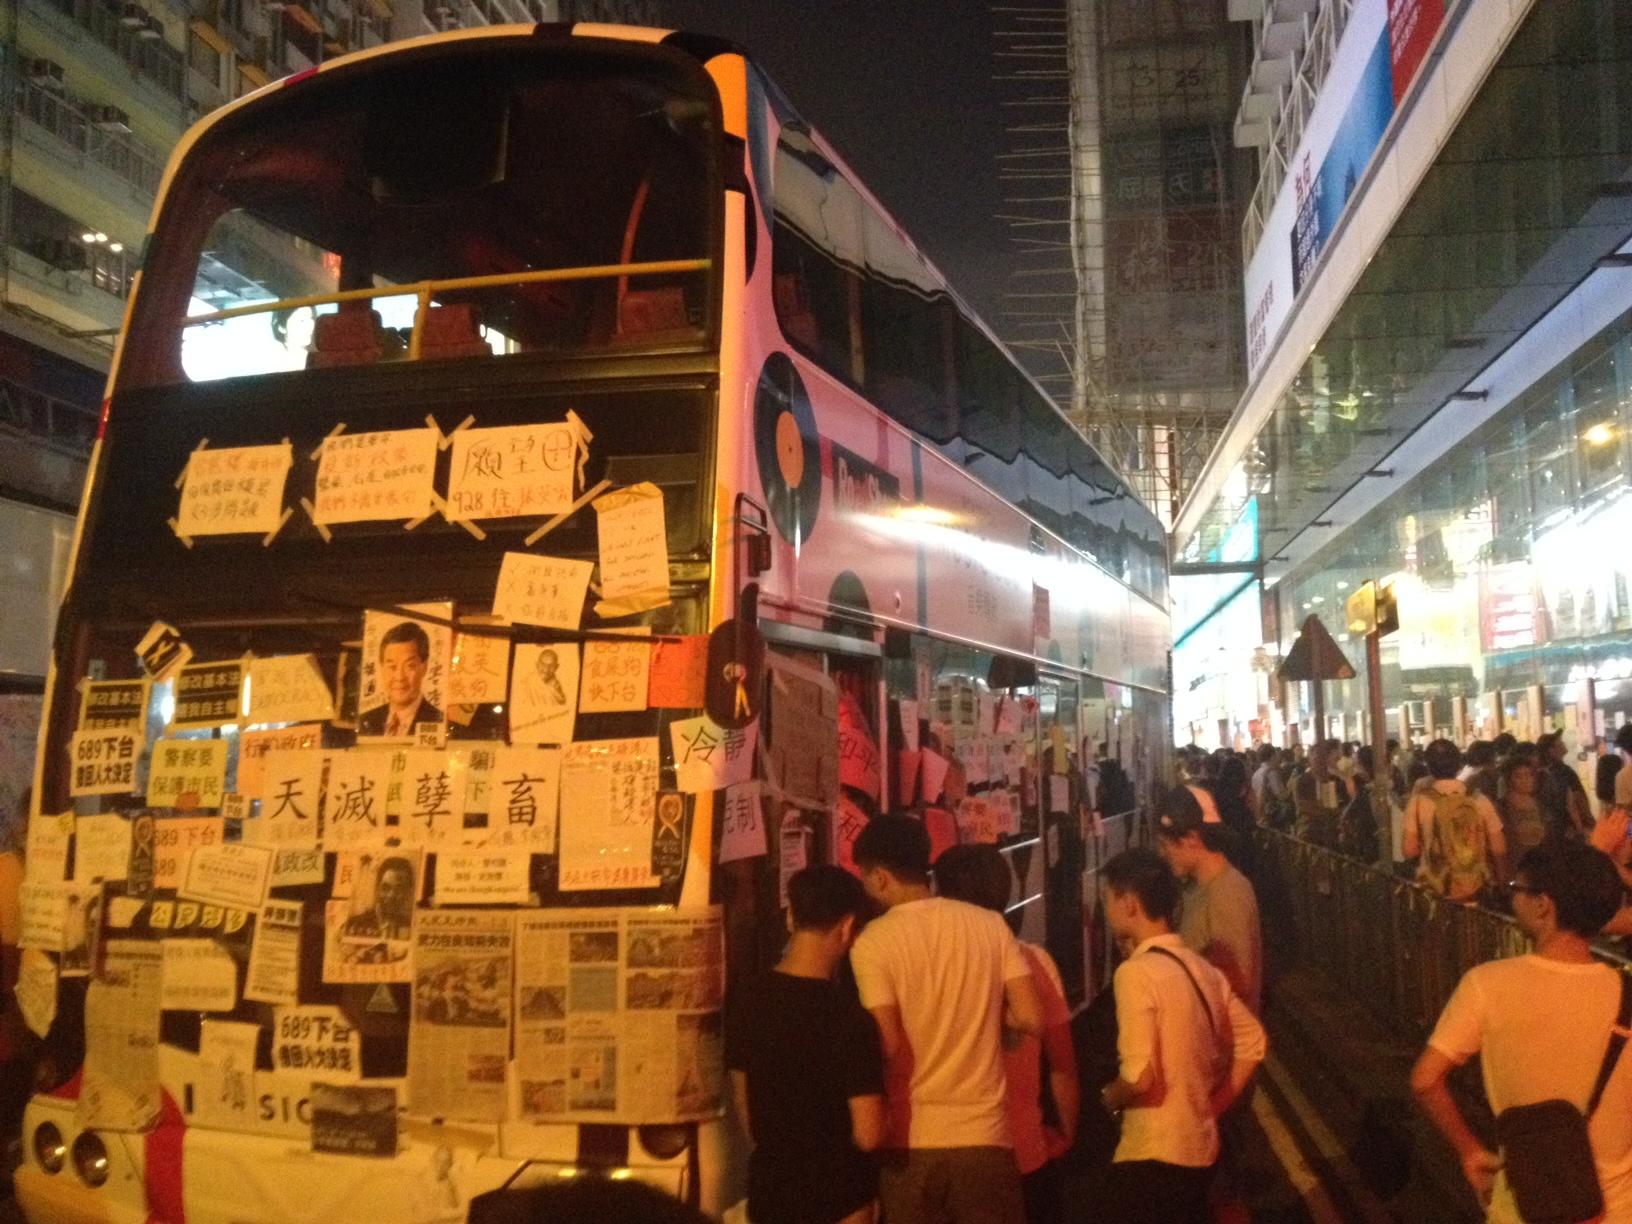 This Hong Kong bus, along with a few others, has been parked in the middle of a Mong Kok street since Sunday. It now serves as a 